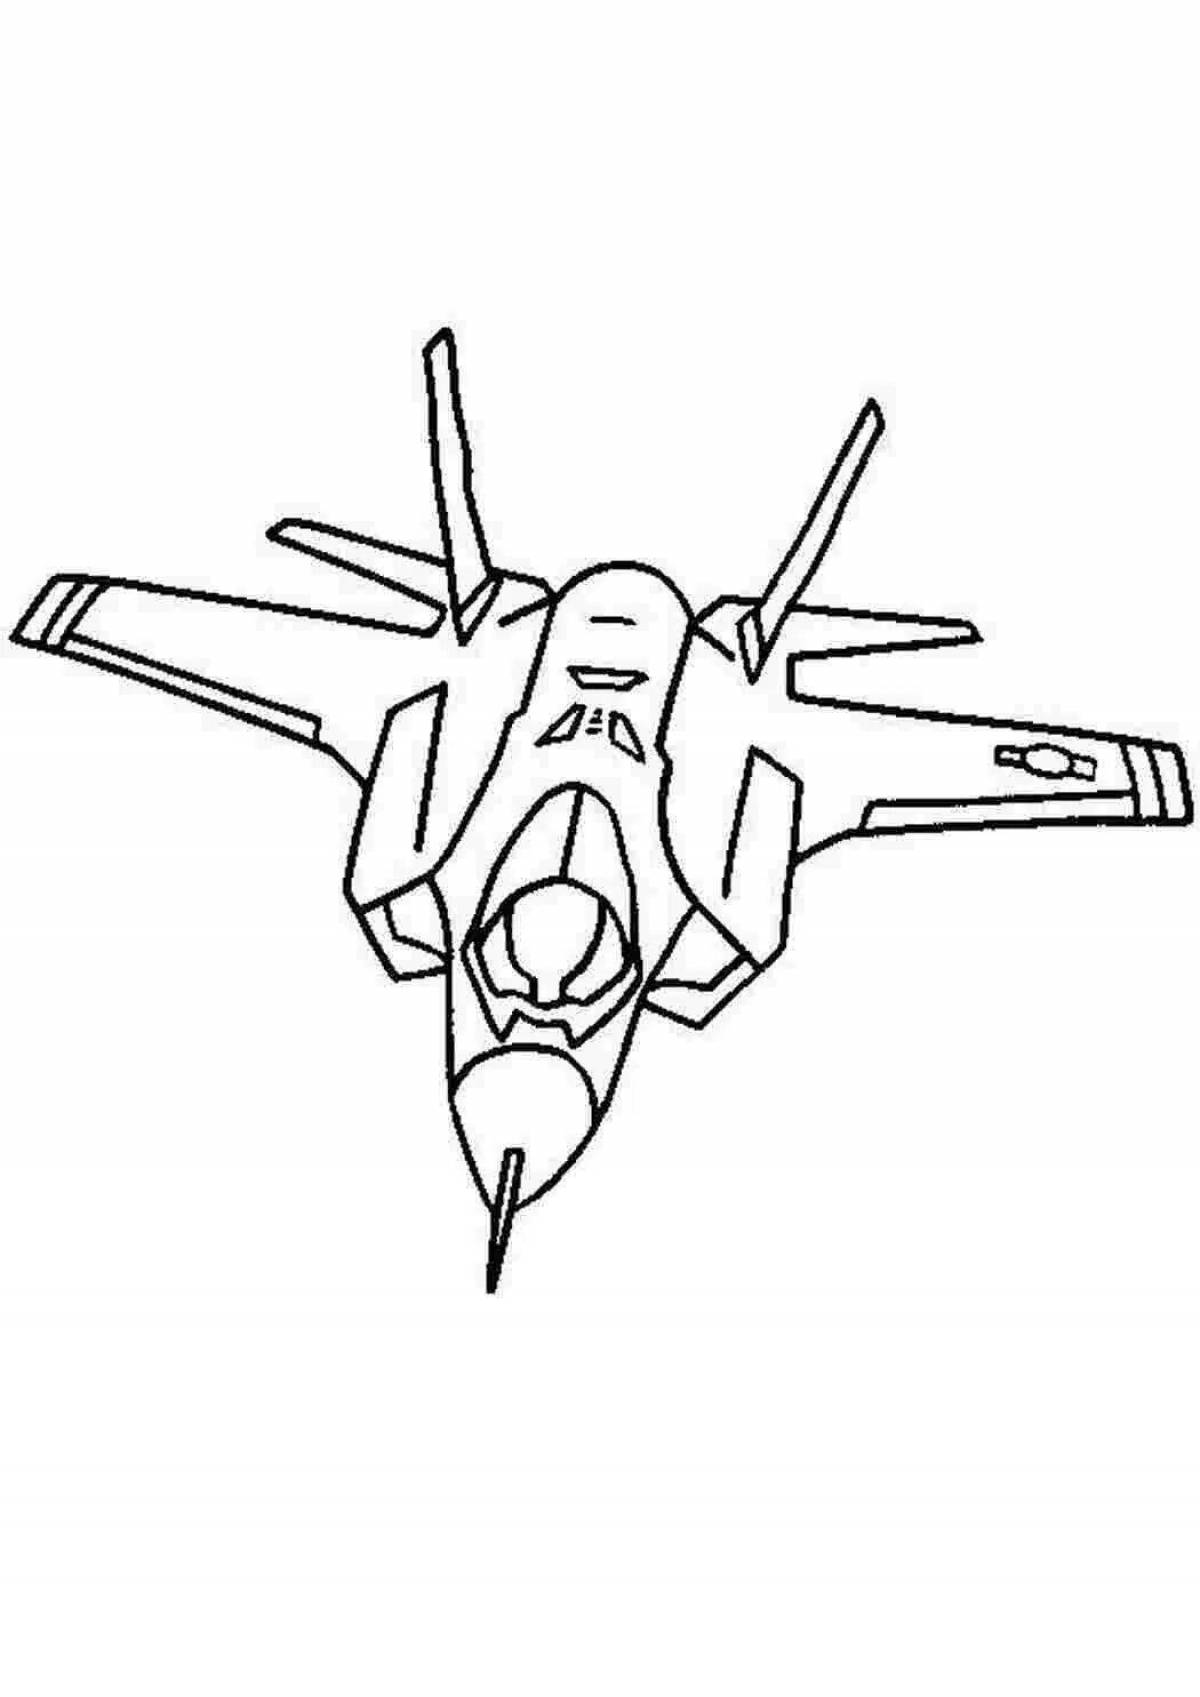 Eater beckoning plane coloring page